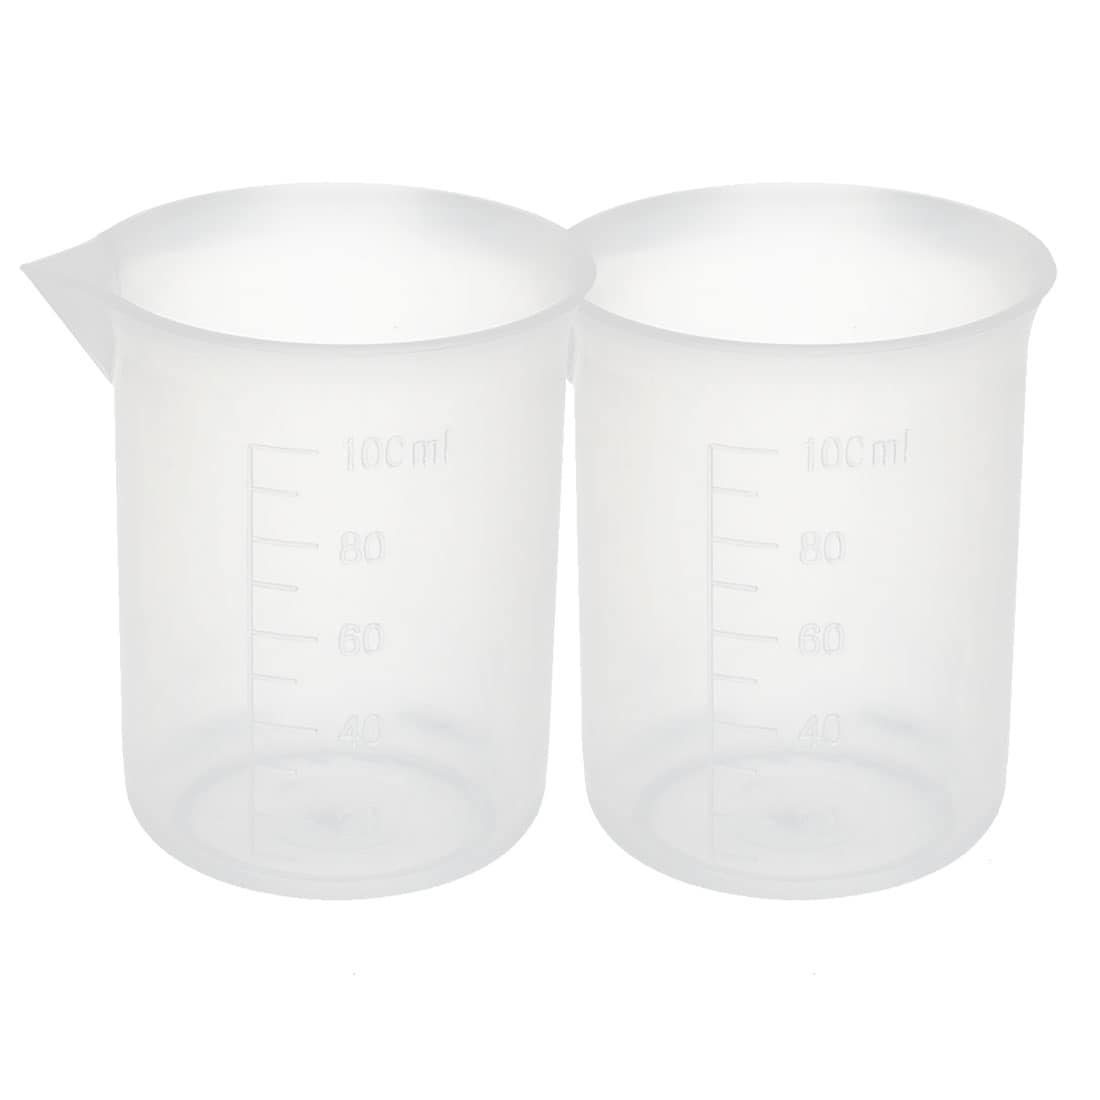 https://ak1.ostkcdn.com/images/products/is/images/direct/d2cb2bba6ce9c32ab1919a17a27f3729281653ba/2-Pcs-100mL-Plastic-Science-Experiment-Measuring-Graduated-Beaker-Cup-6.3cm-Dia.jpg